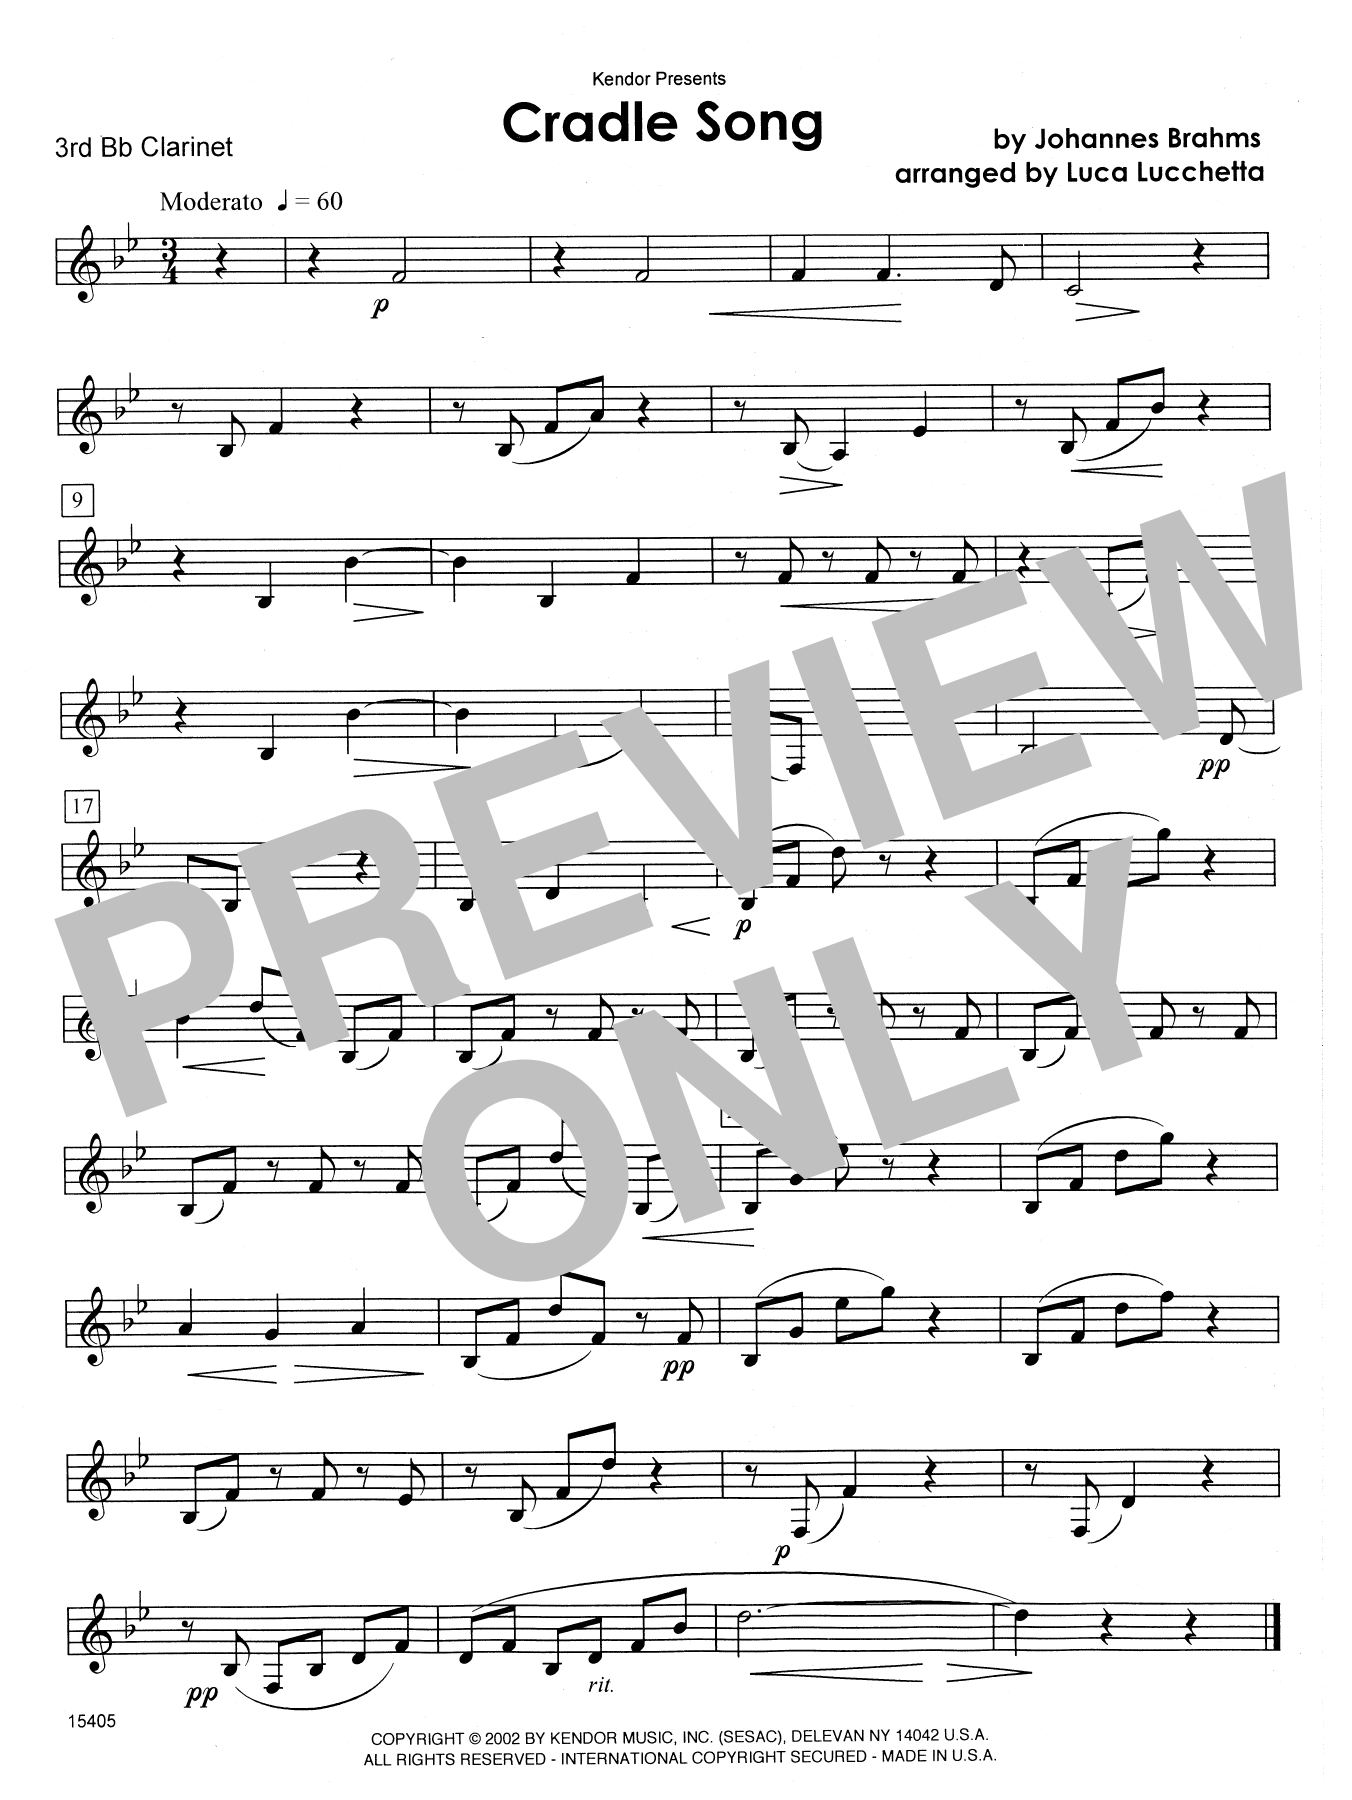 Download Lucchetta Cradle Song - 3rd Bb Clarinet Sheet Music